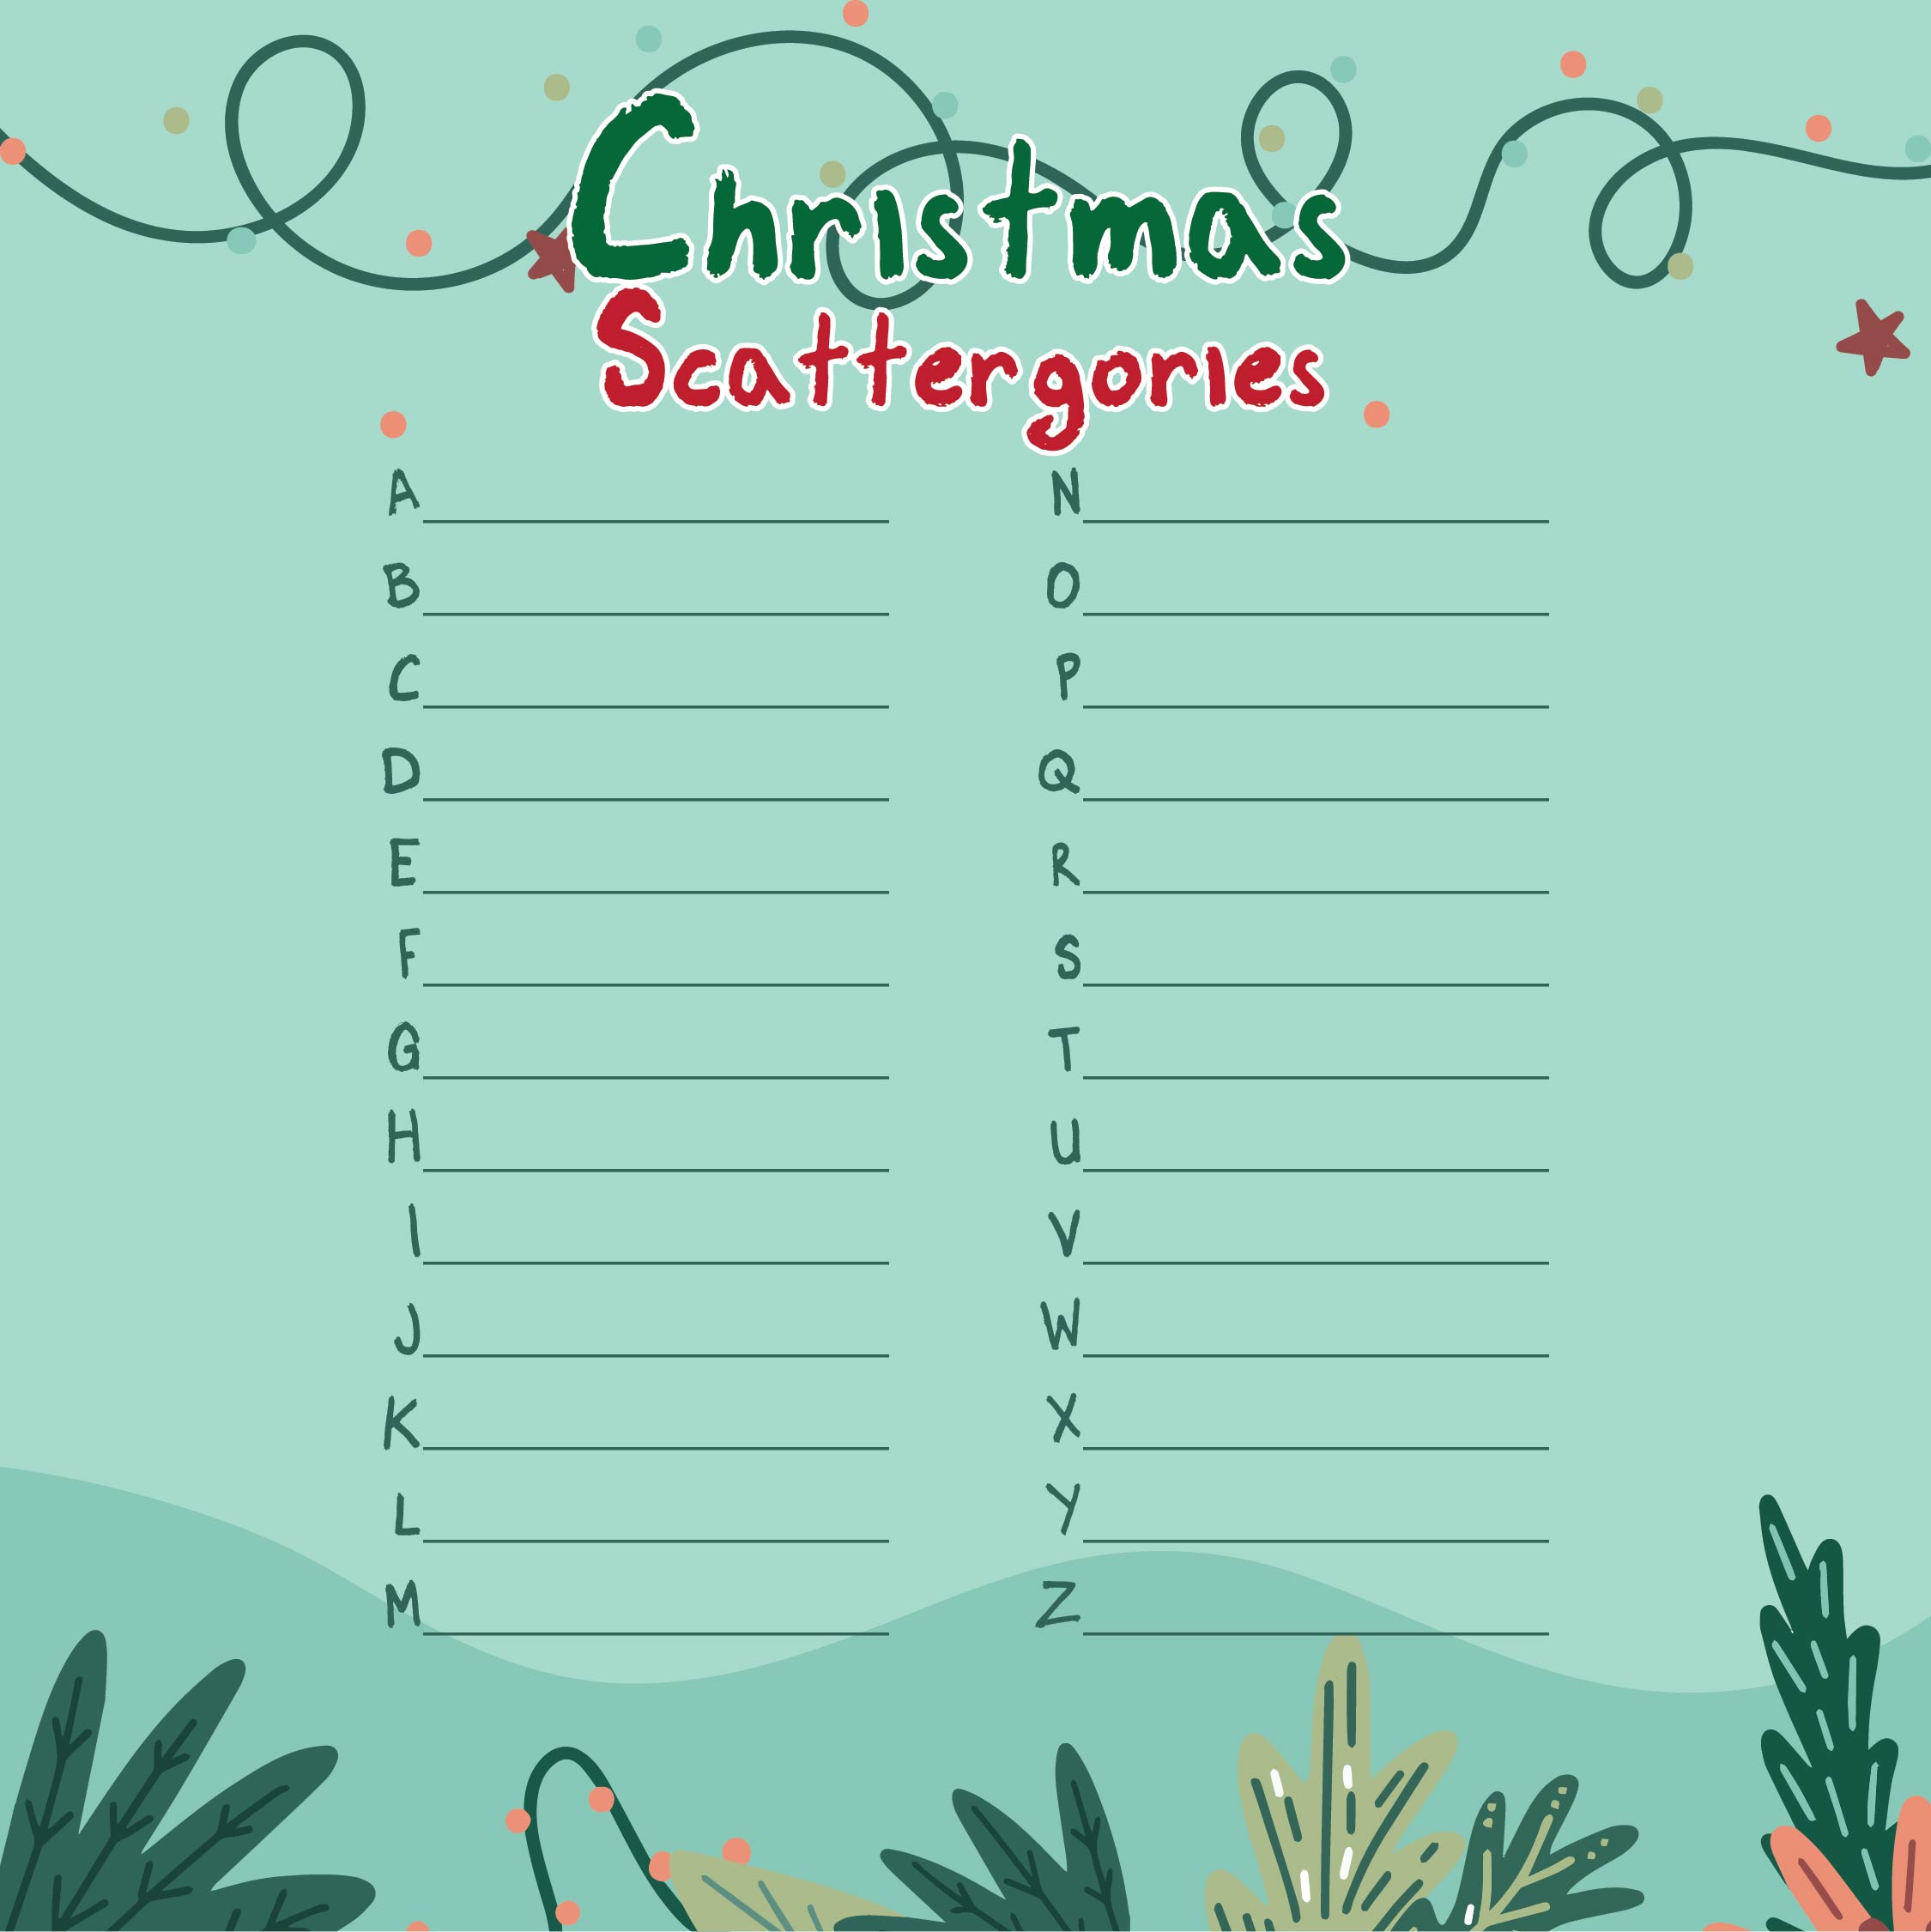 5-best-images-of-christmas-scattergories-printable-printable